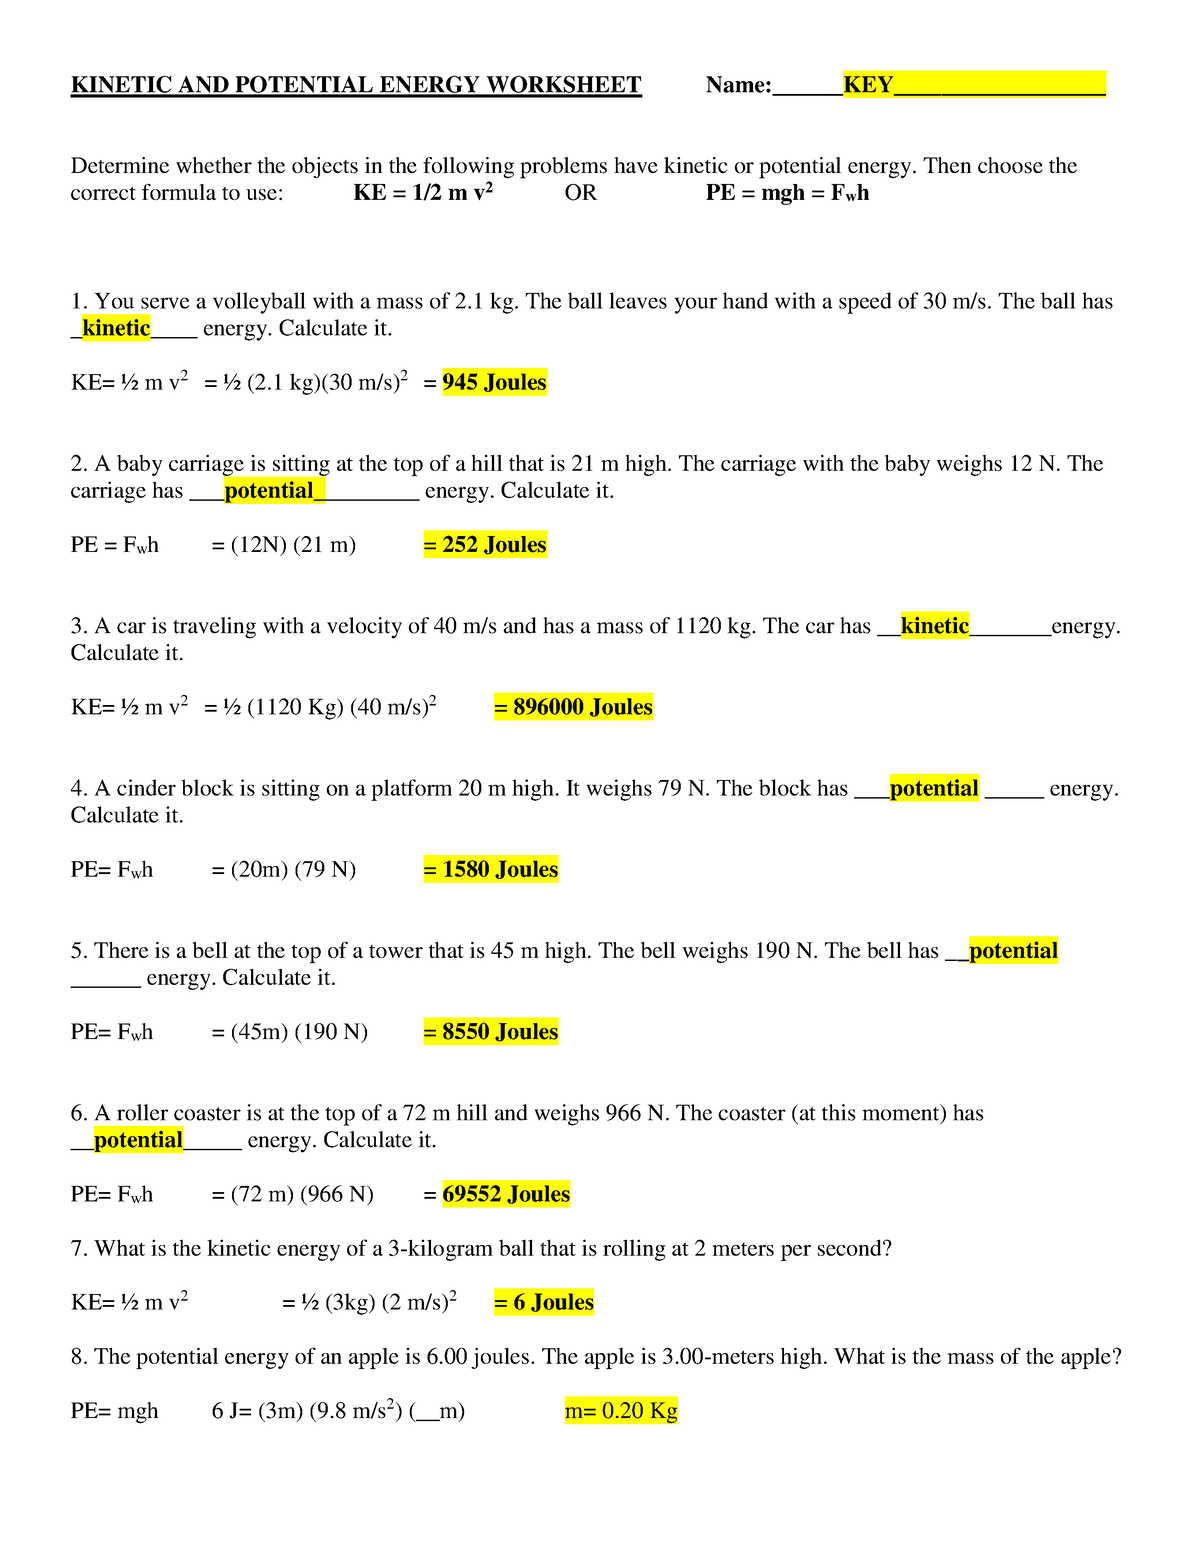 Honors physics kinetic and potenial energy worksheet key - KINETIC AND ...